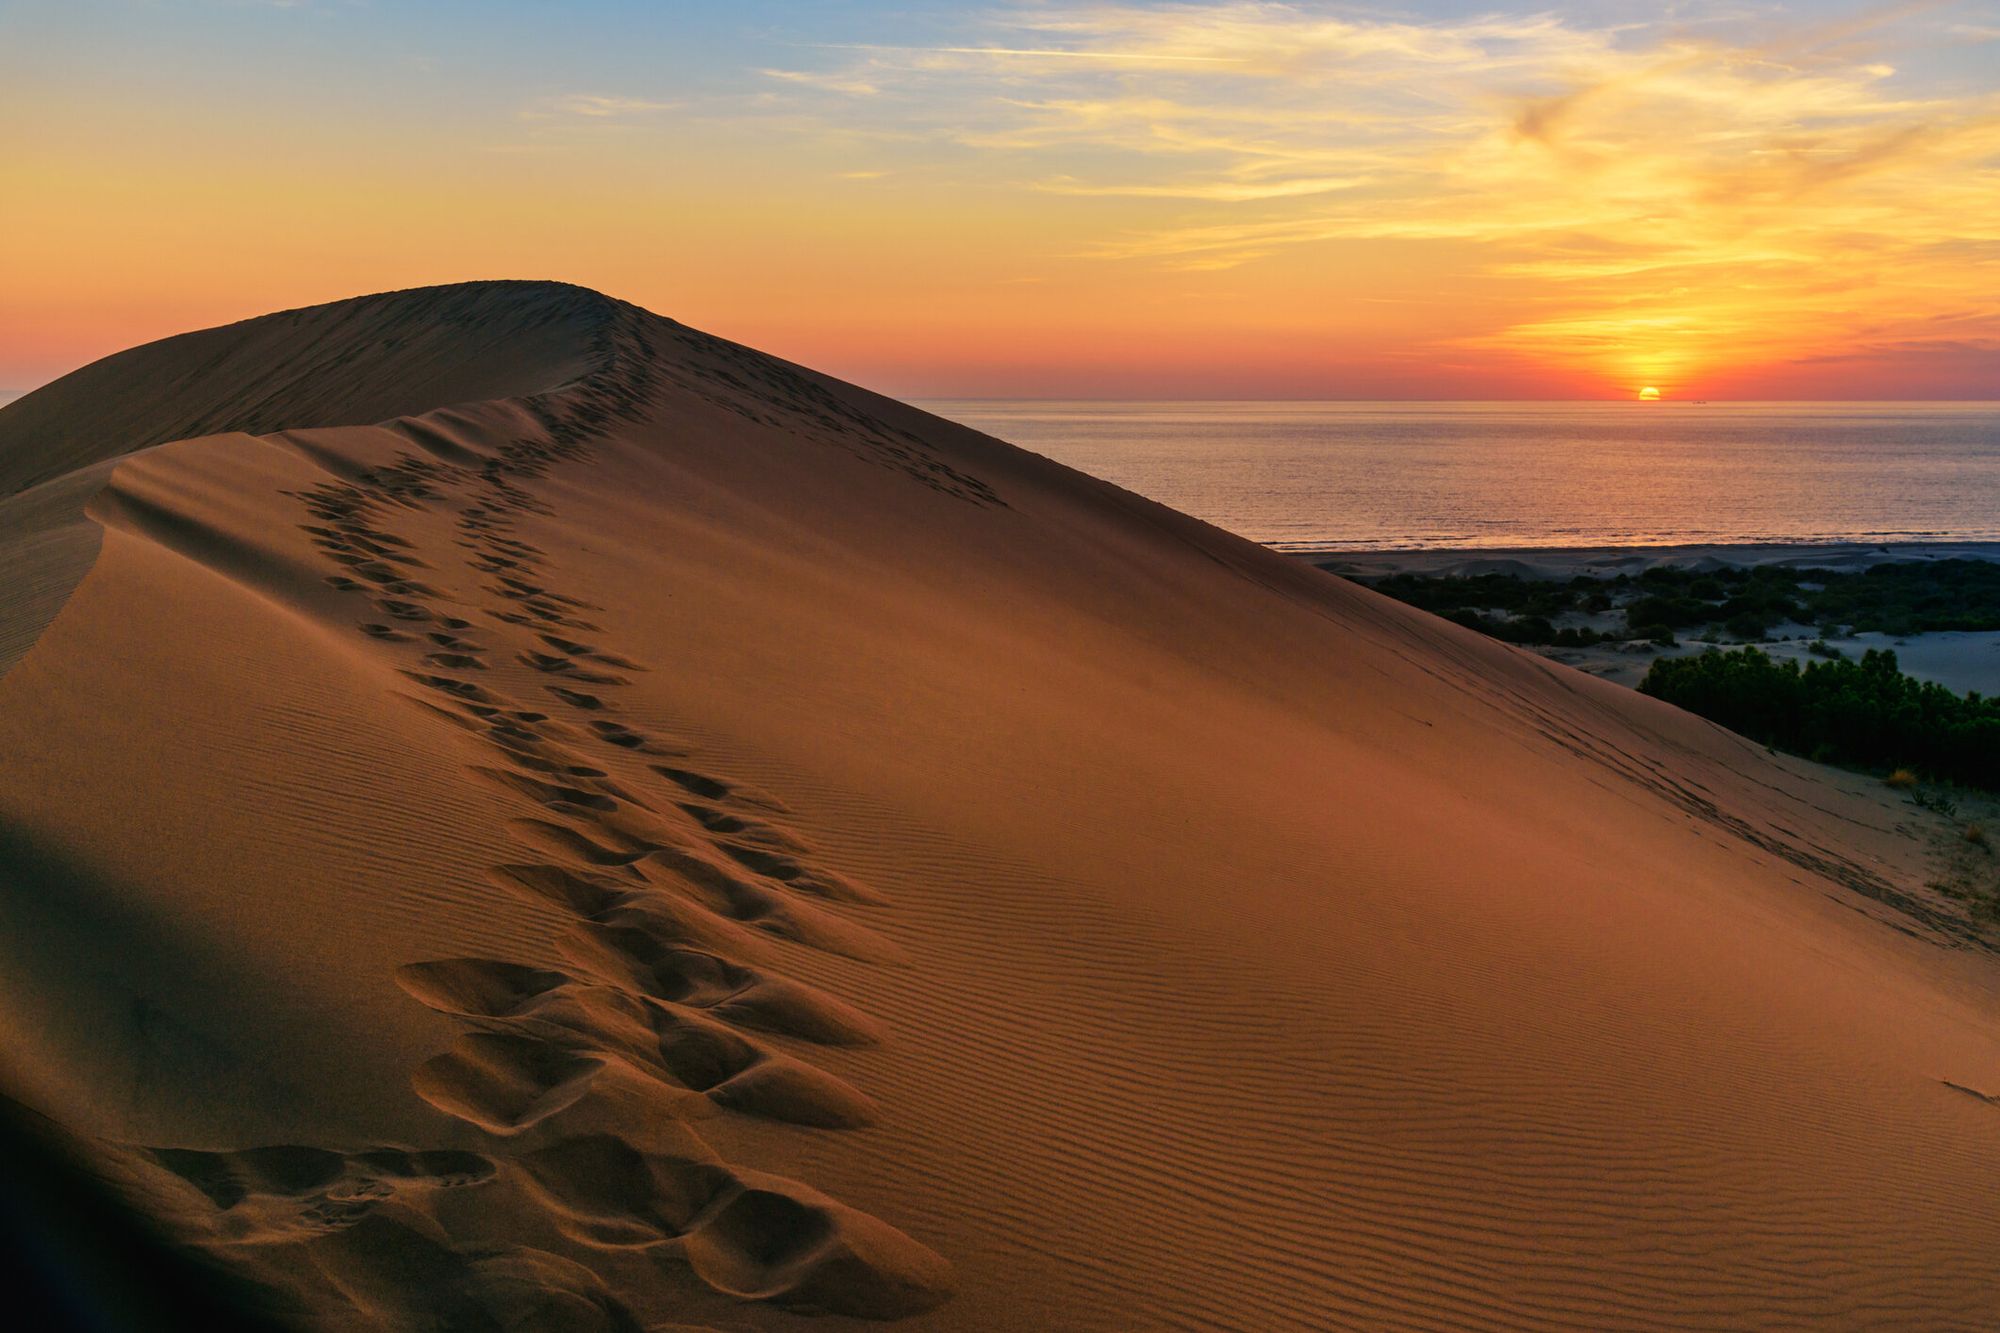 Footprints in the Sand on the Famous, Sand Dunes on Patara Beach at Sunset. Antalya, Turkey — Getty Images